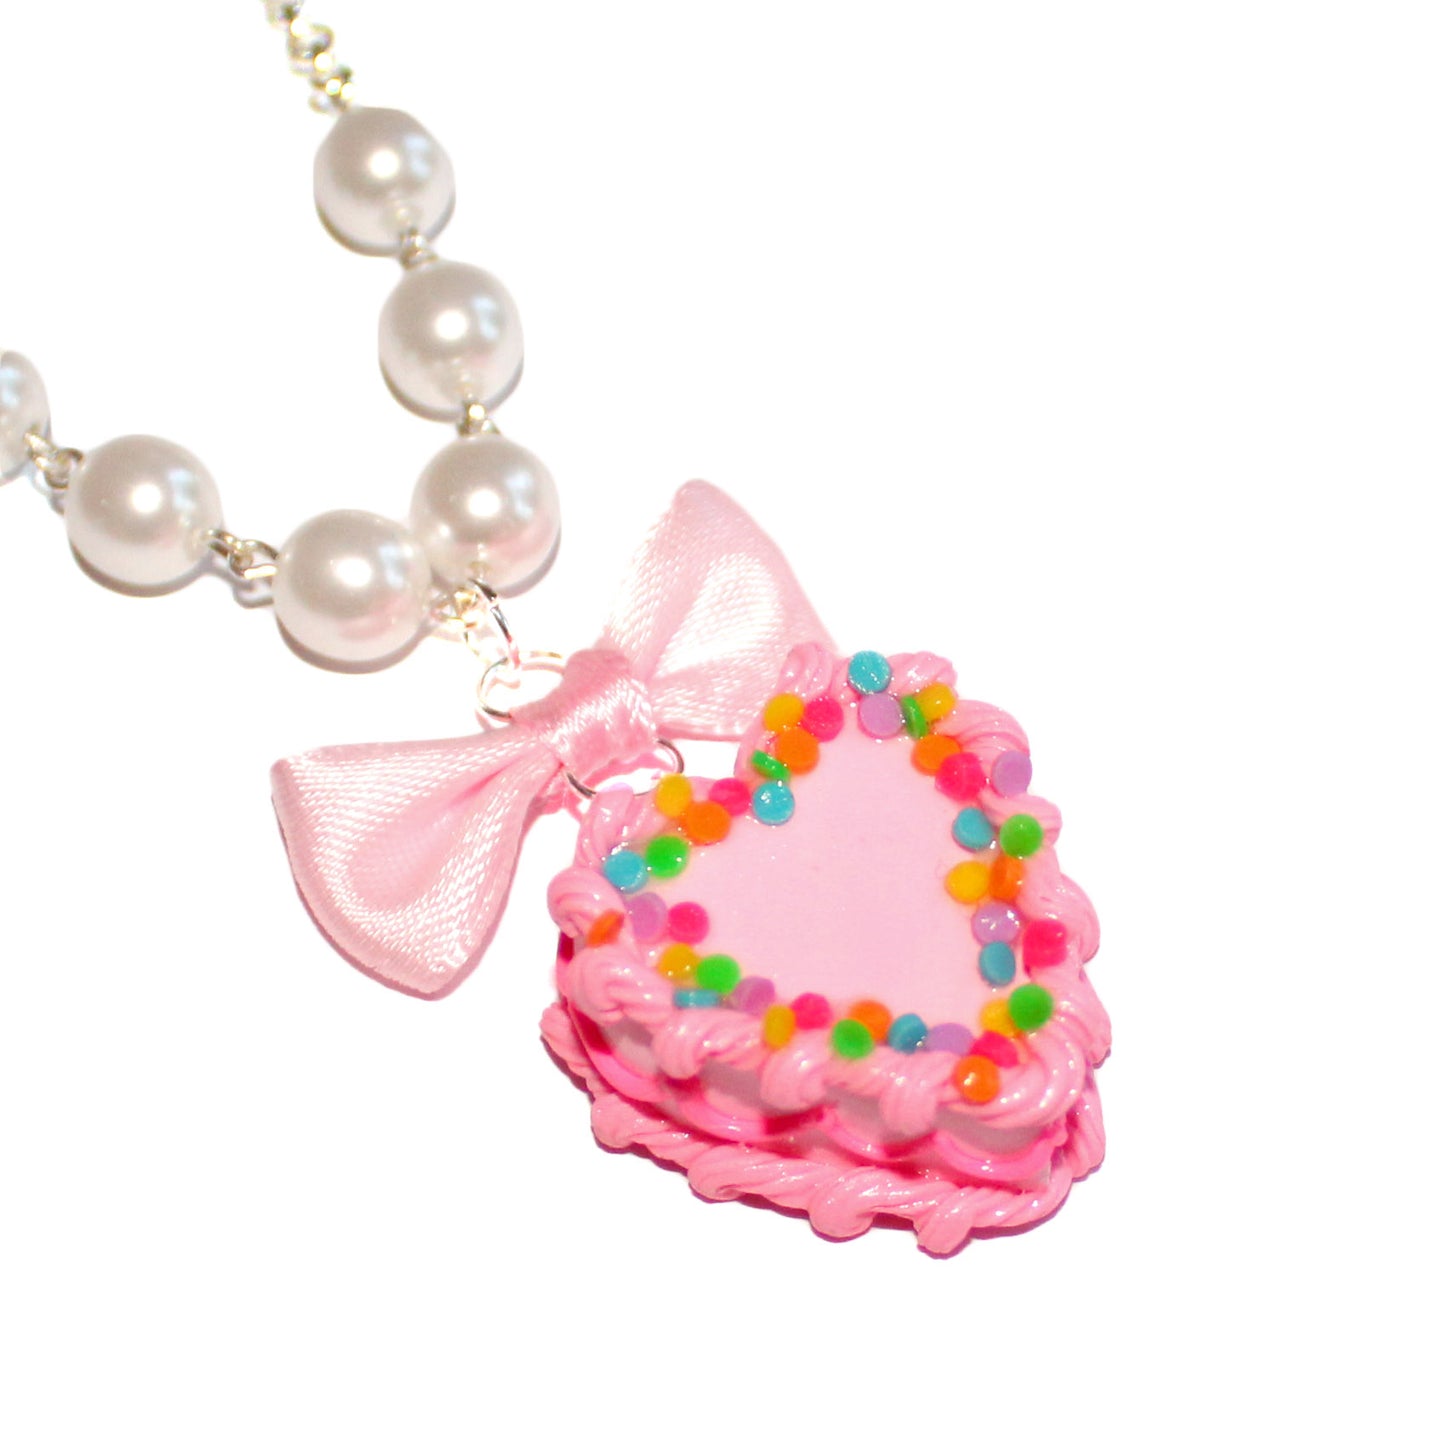 Heart Pink Birthday Cake Necklace